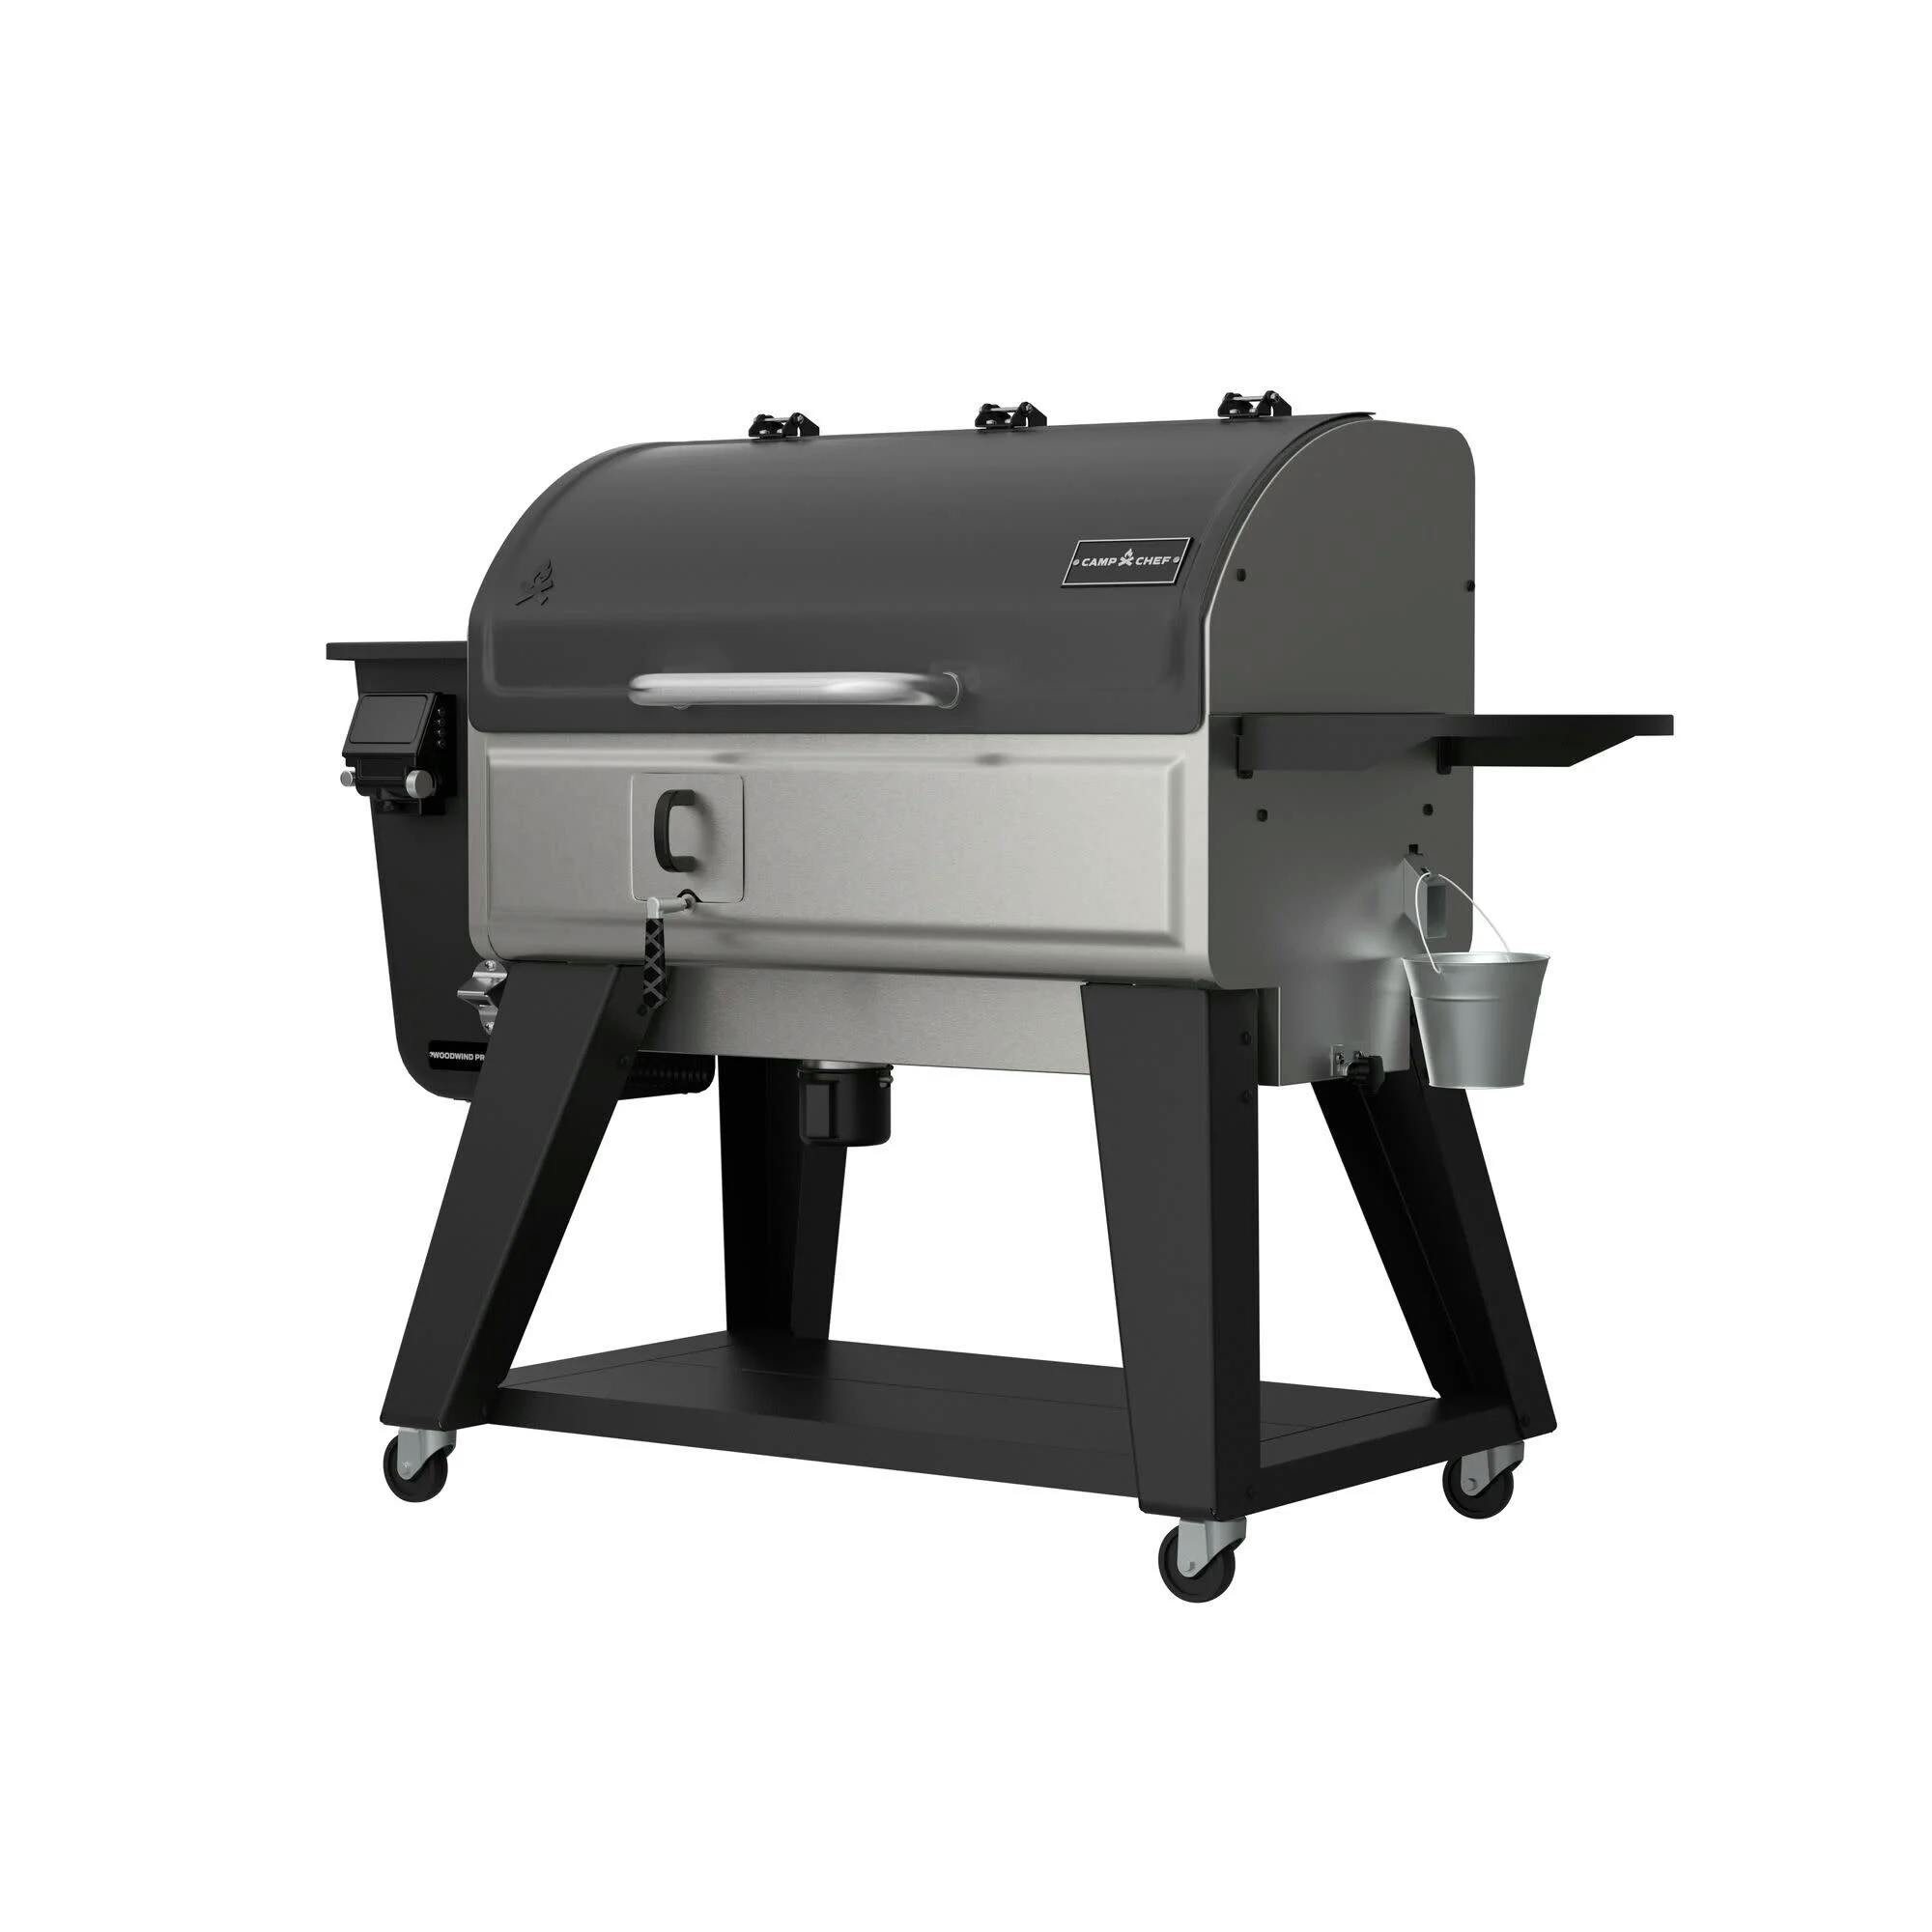 Camp Chef Woodwind Pro WiFi Pellet Grill